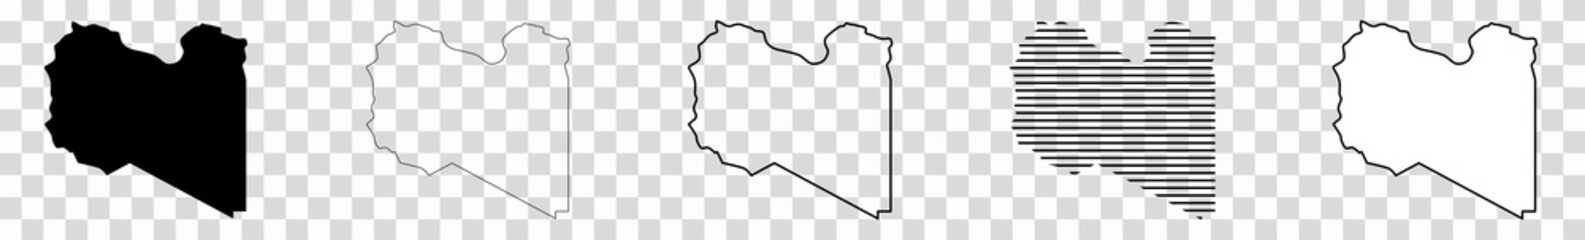 Libya Map Black | Libyan Border | State Country | Transparent Isolated | Variations